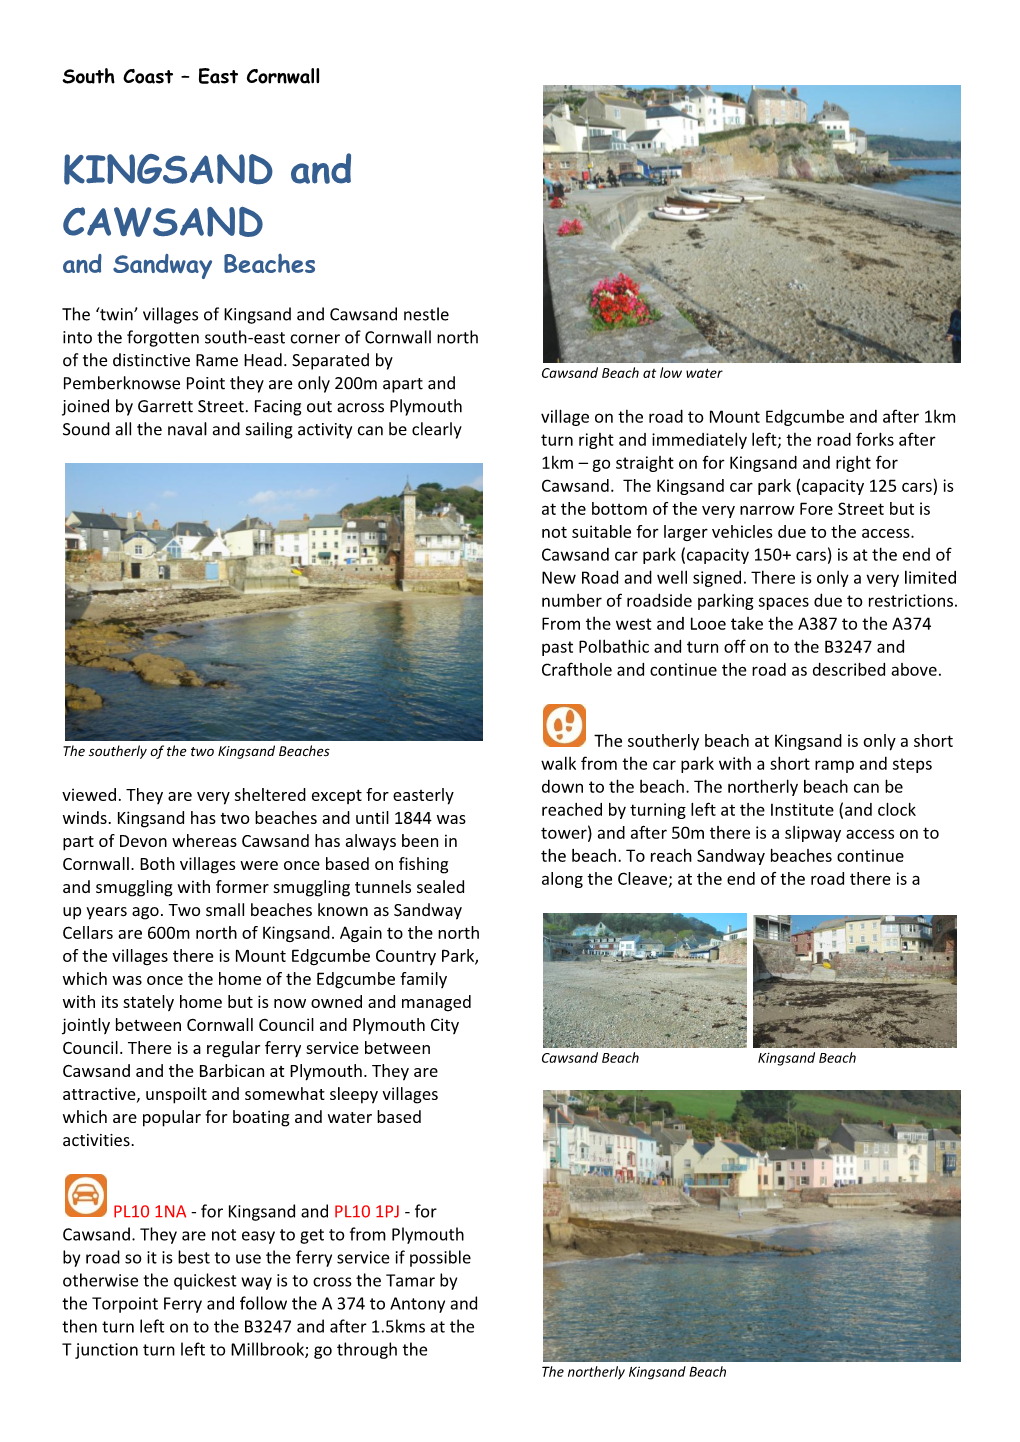 CAWSAND and Sandway Beaches